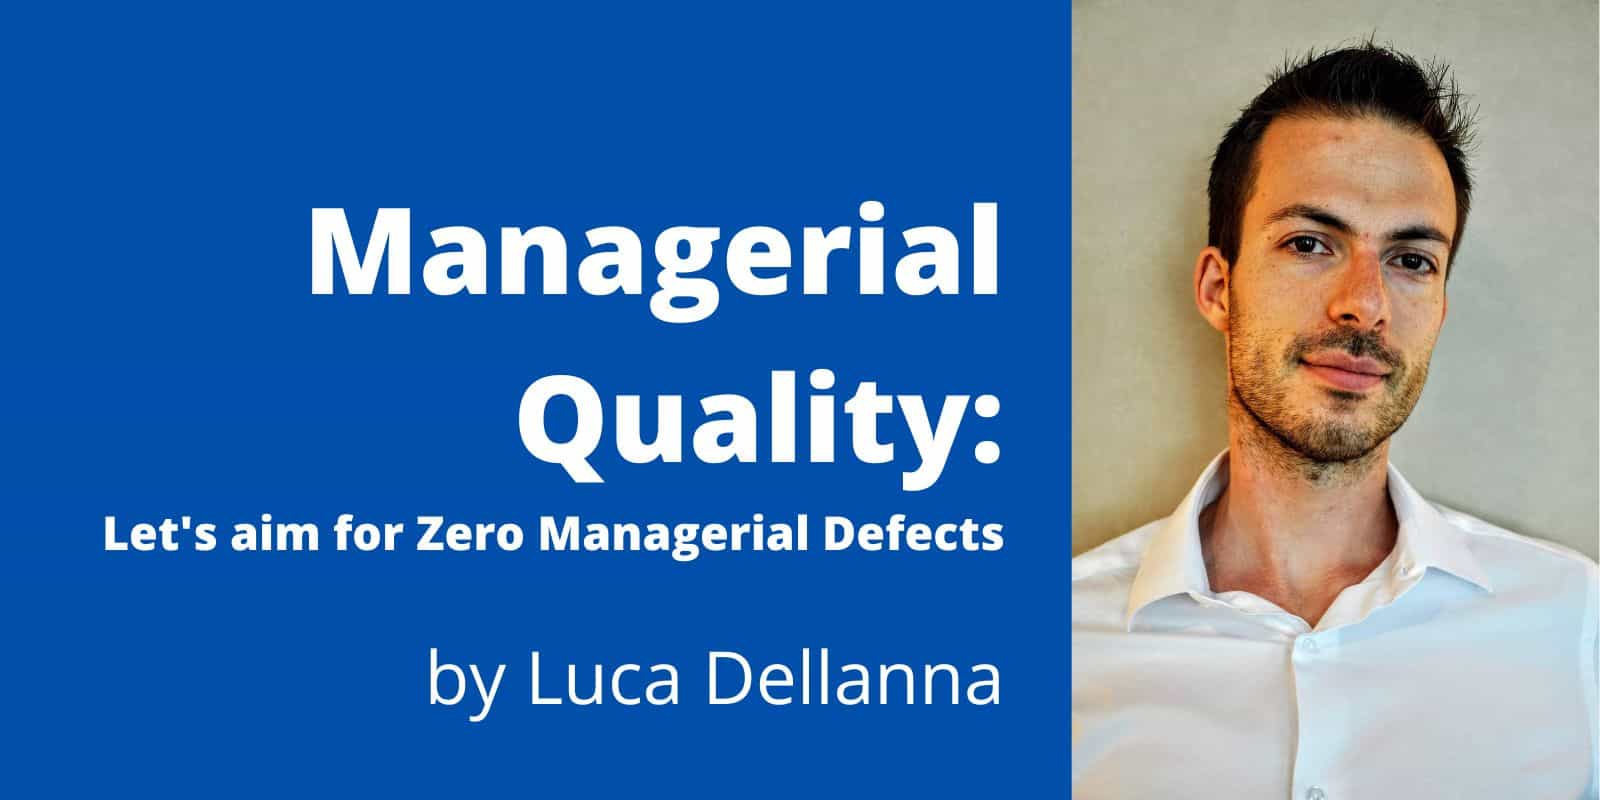 Managerial Quality